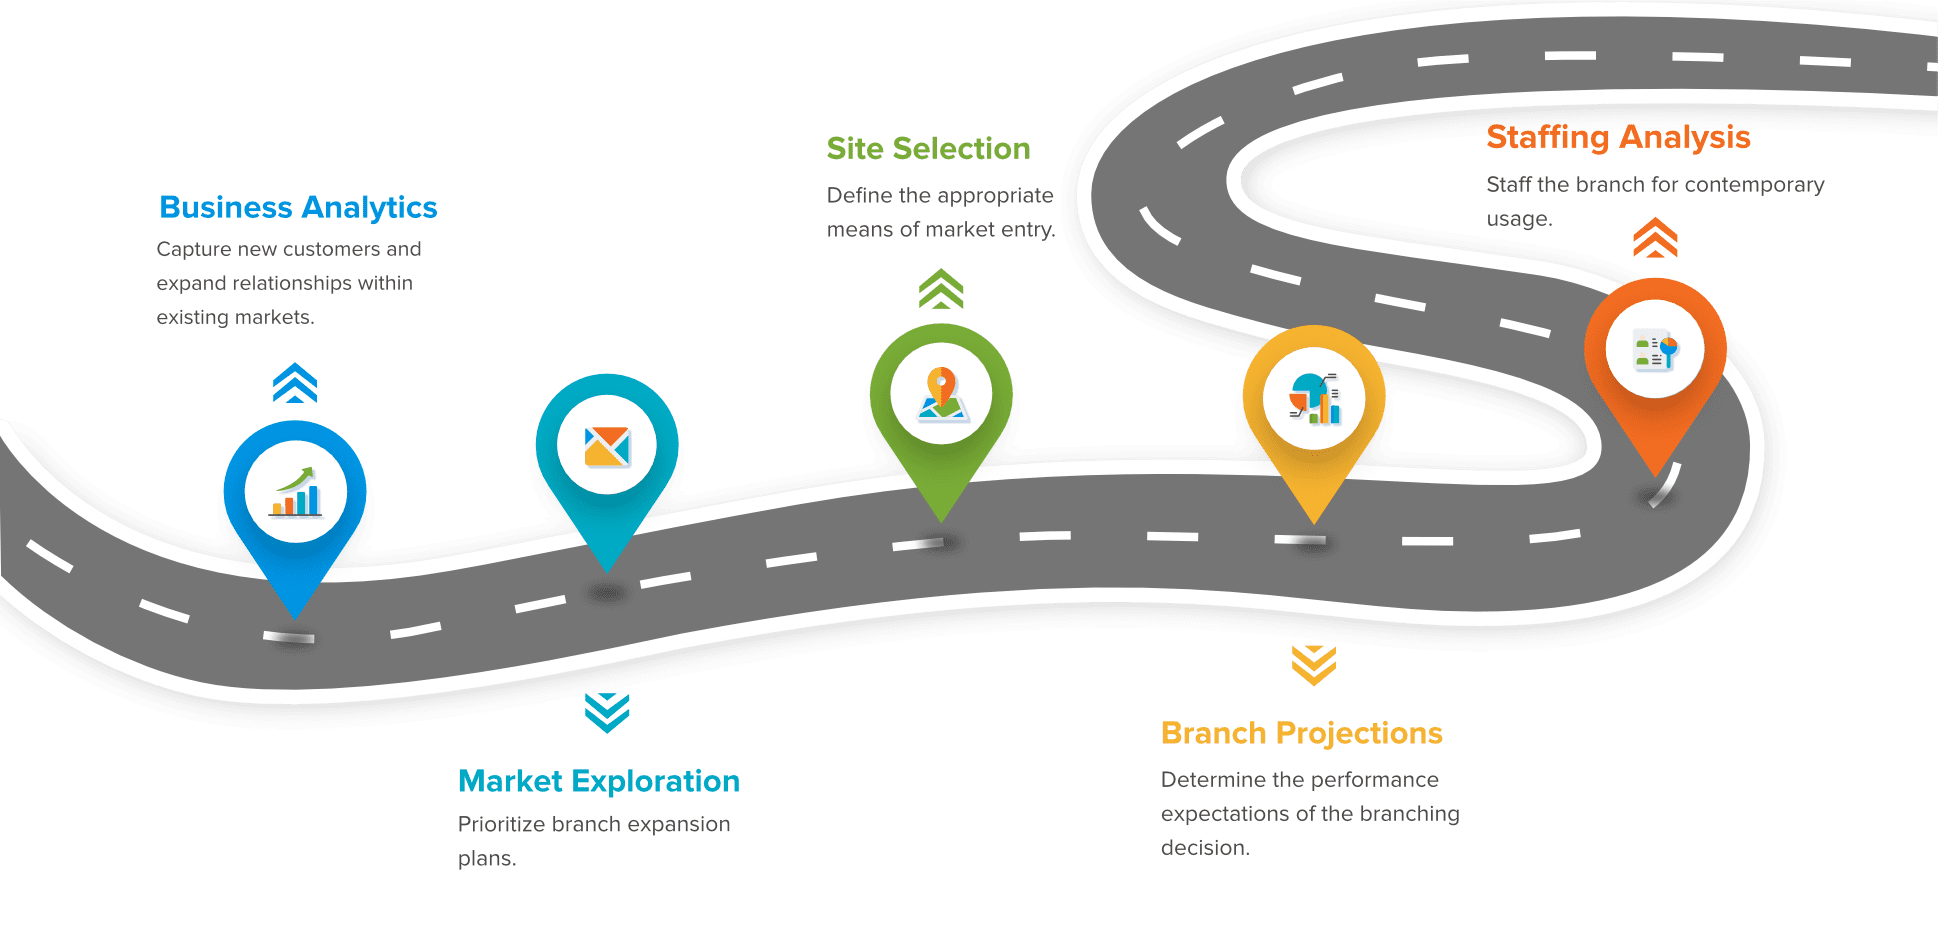 Market Intelligence graphic showing the process: Business Analytics, Market Exploration, Site Selection, Branch Projections, Staffing Analysis 